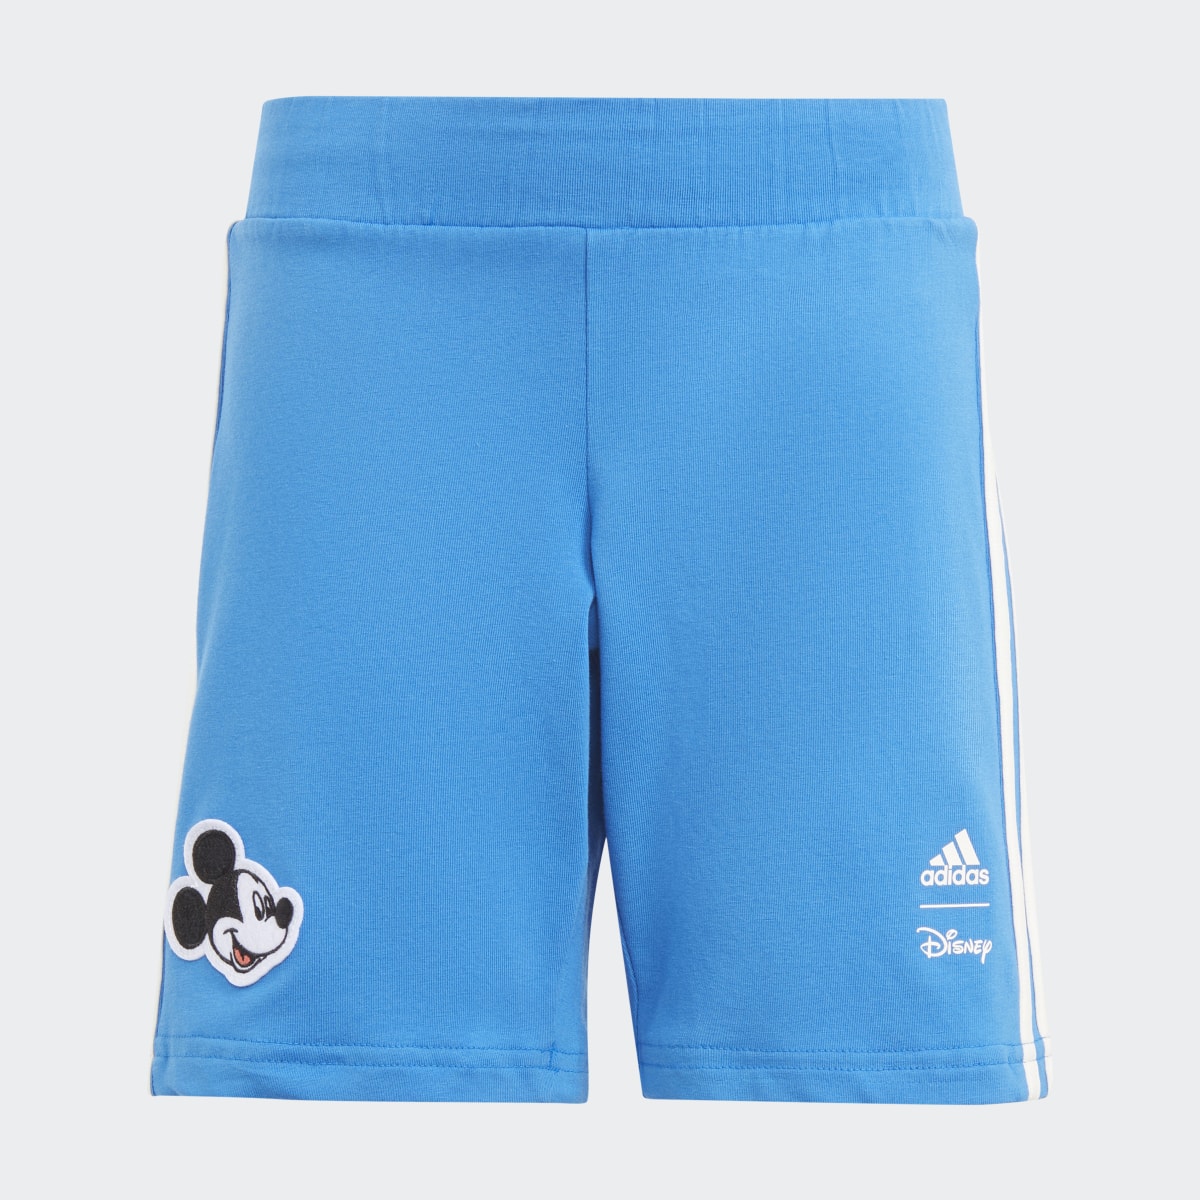 Adidas Completo adidas x Disney Mickey Mouse Tee and Shorts. 4